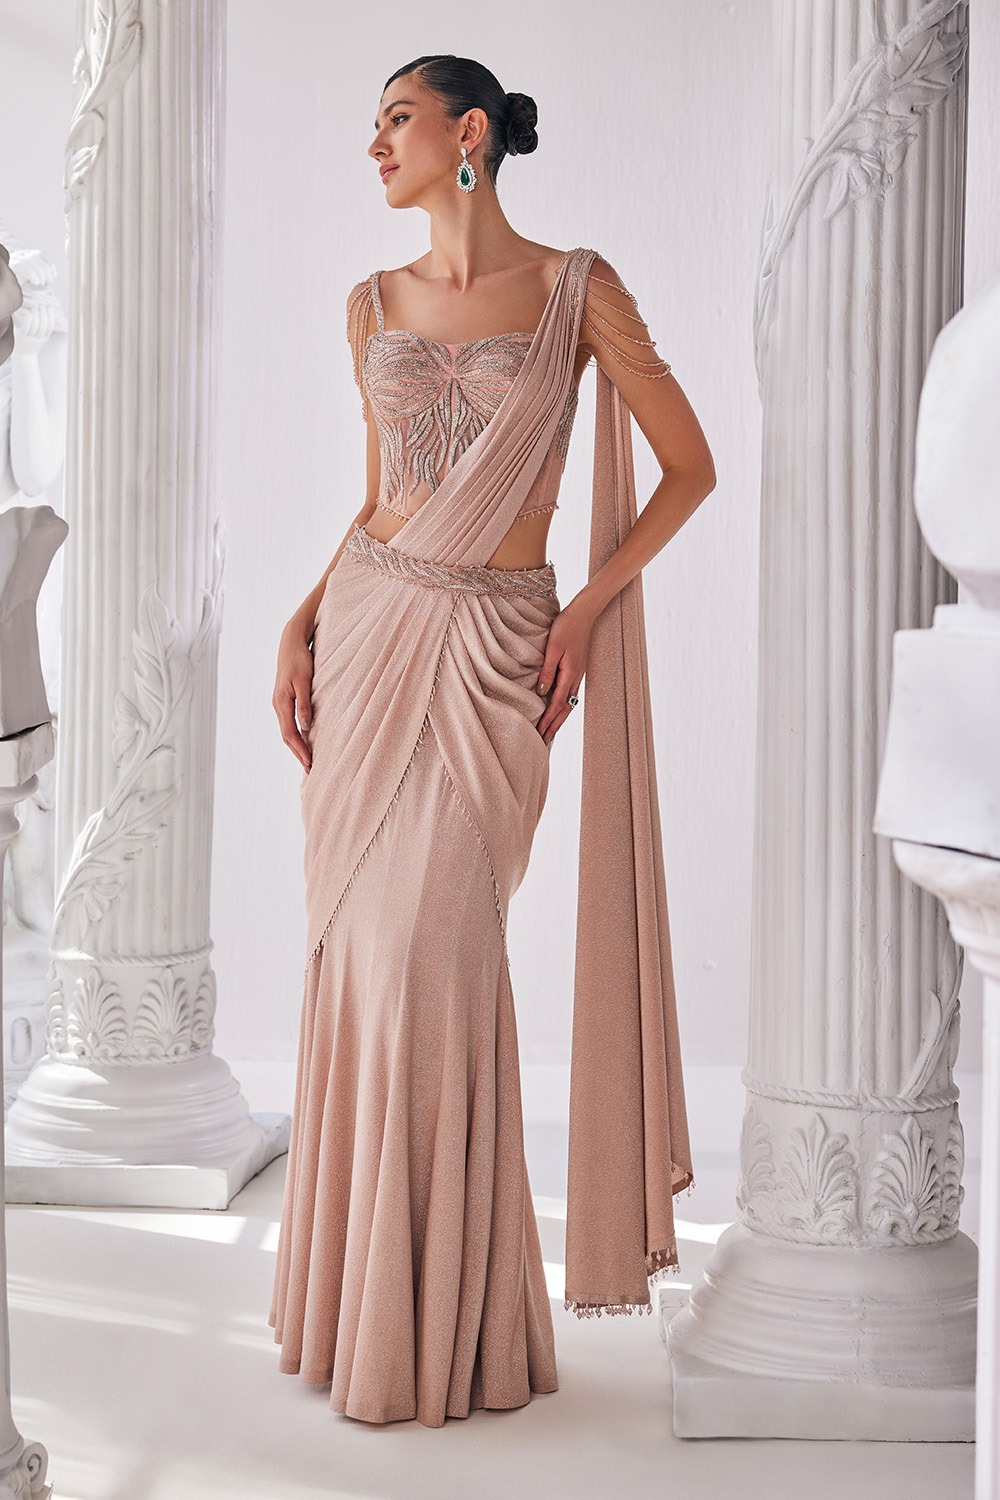 Peach Draped Saree With Corset Blouse And Statement Belt